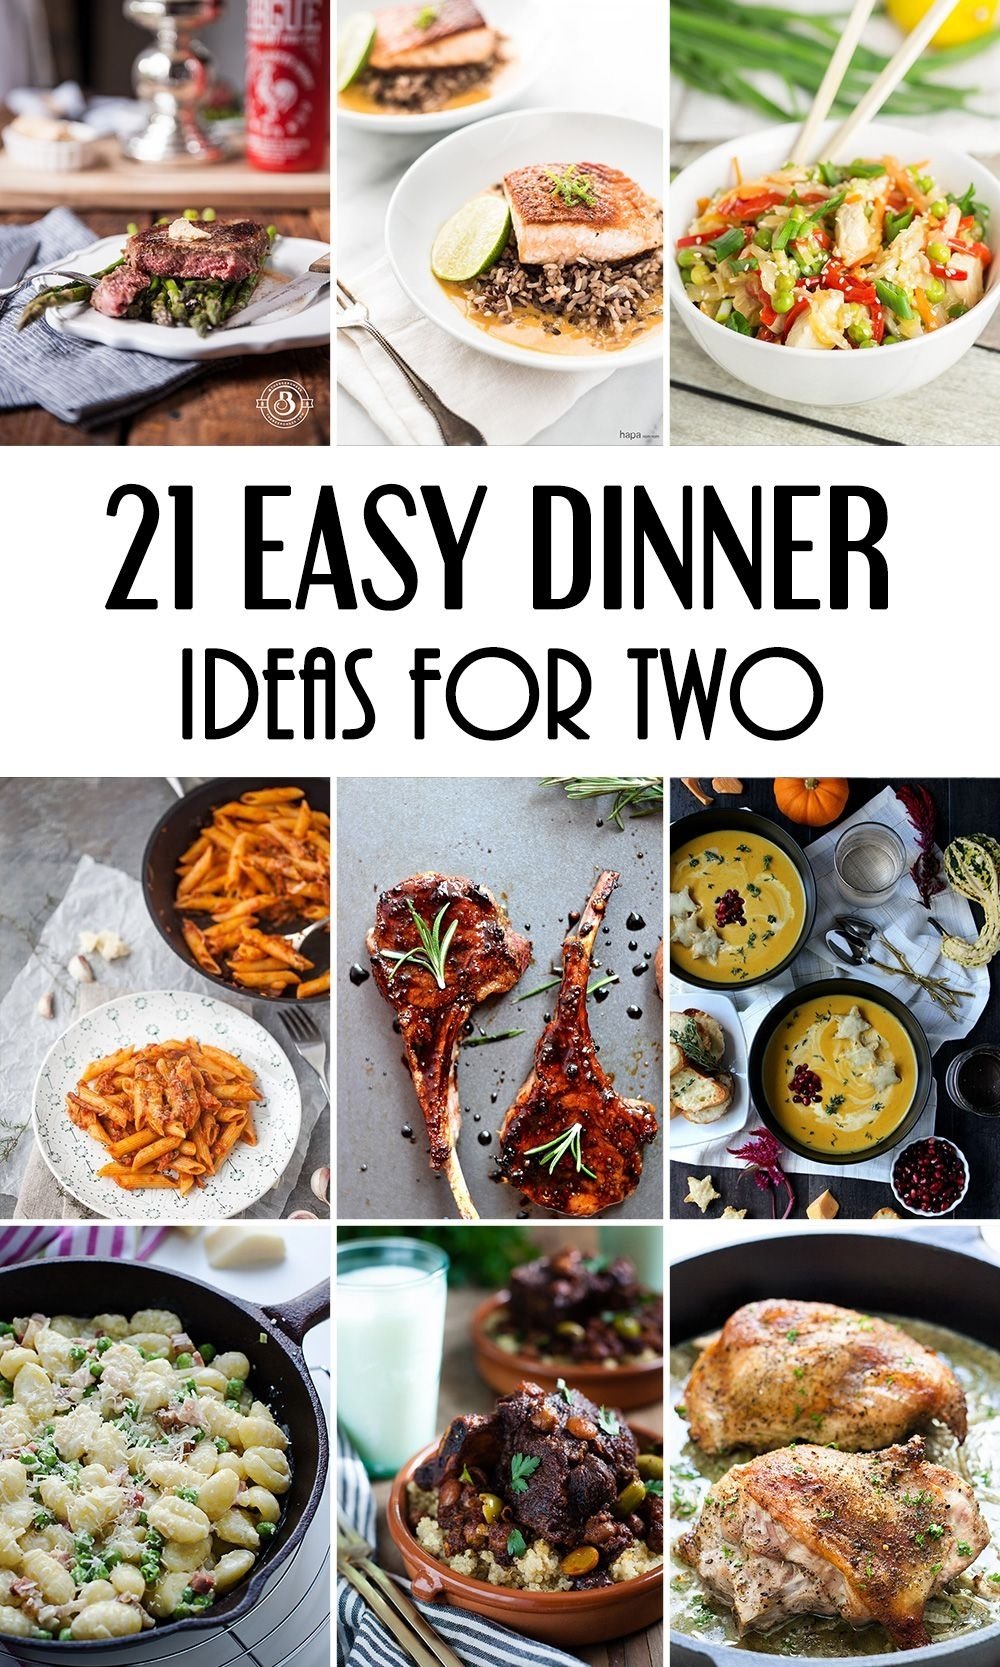 15 Great Cheap Easy Dinners for Two Easy Recipes To Make at Home